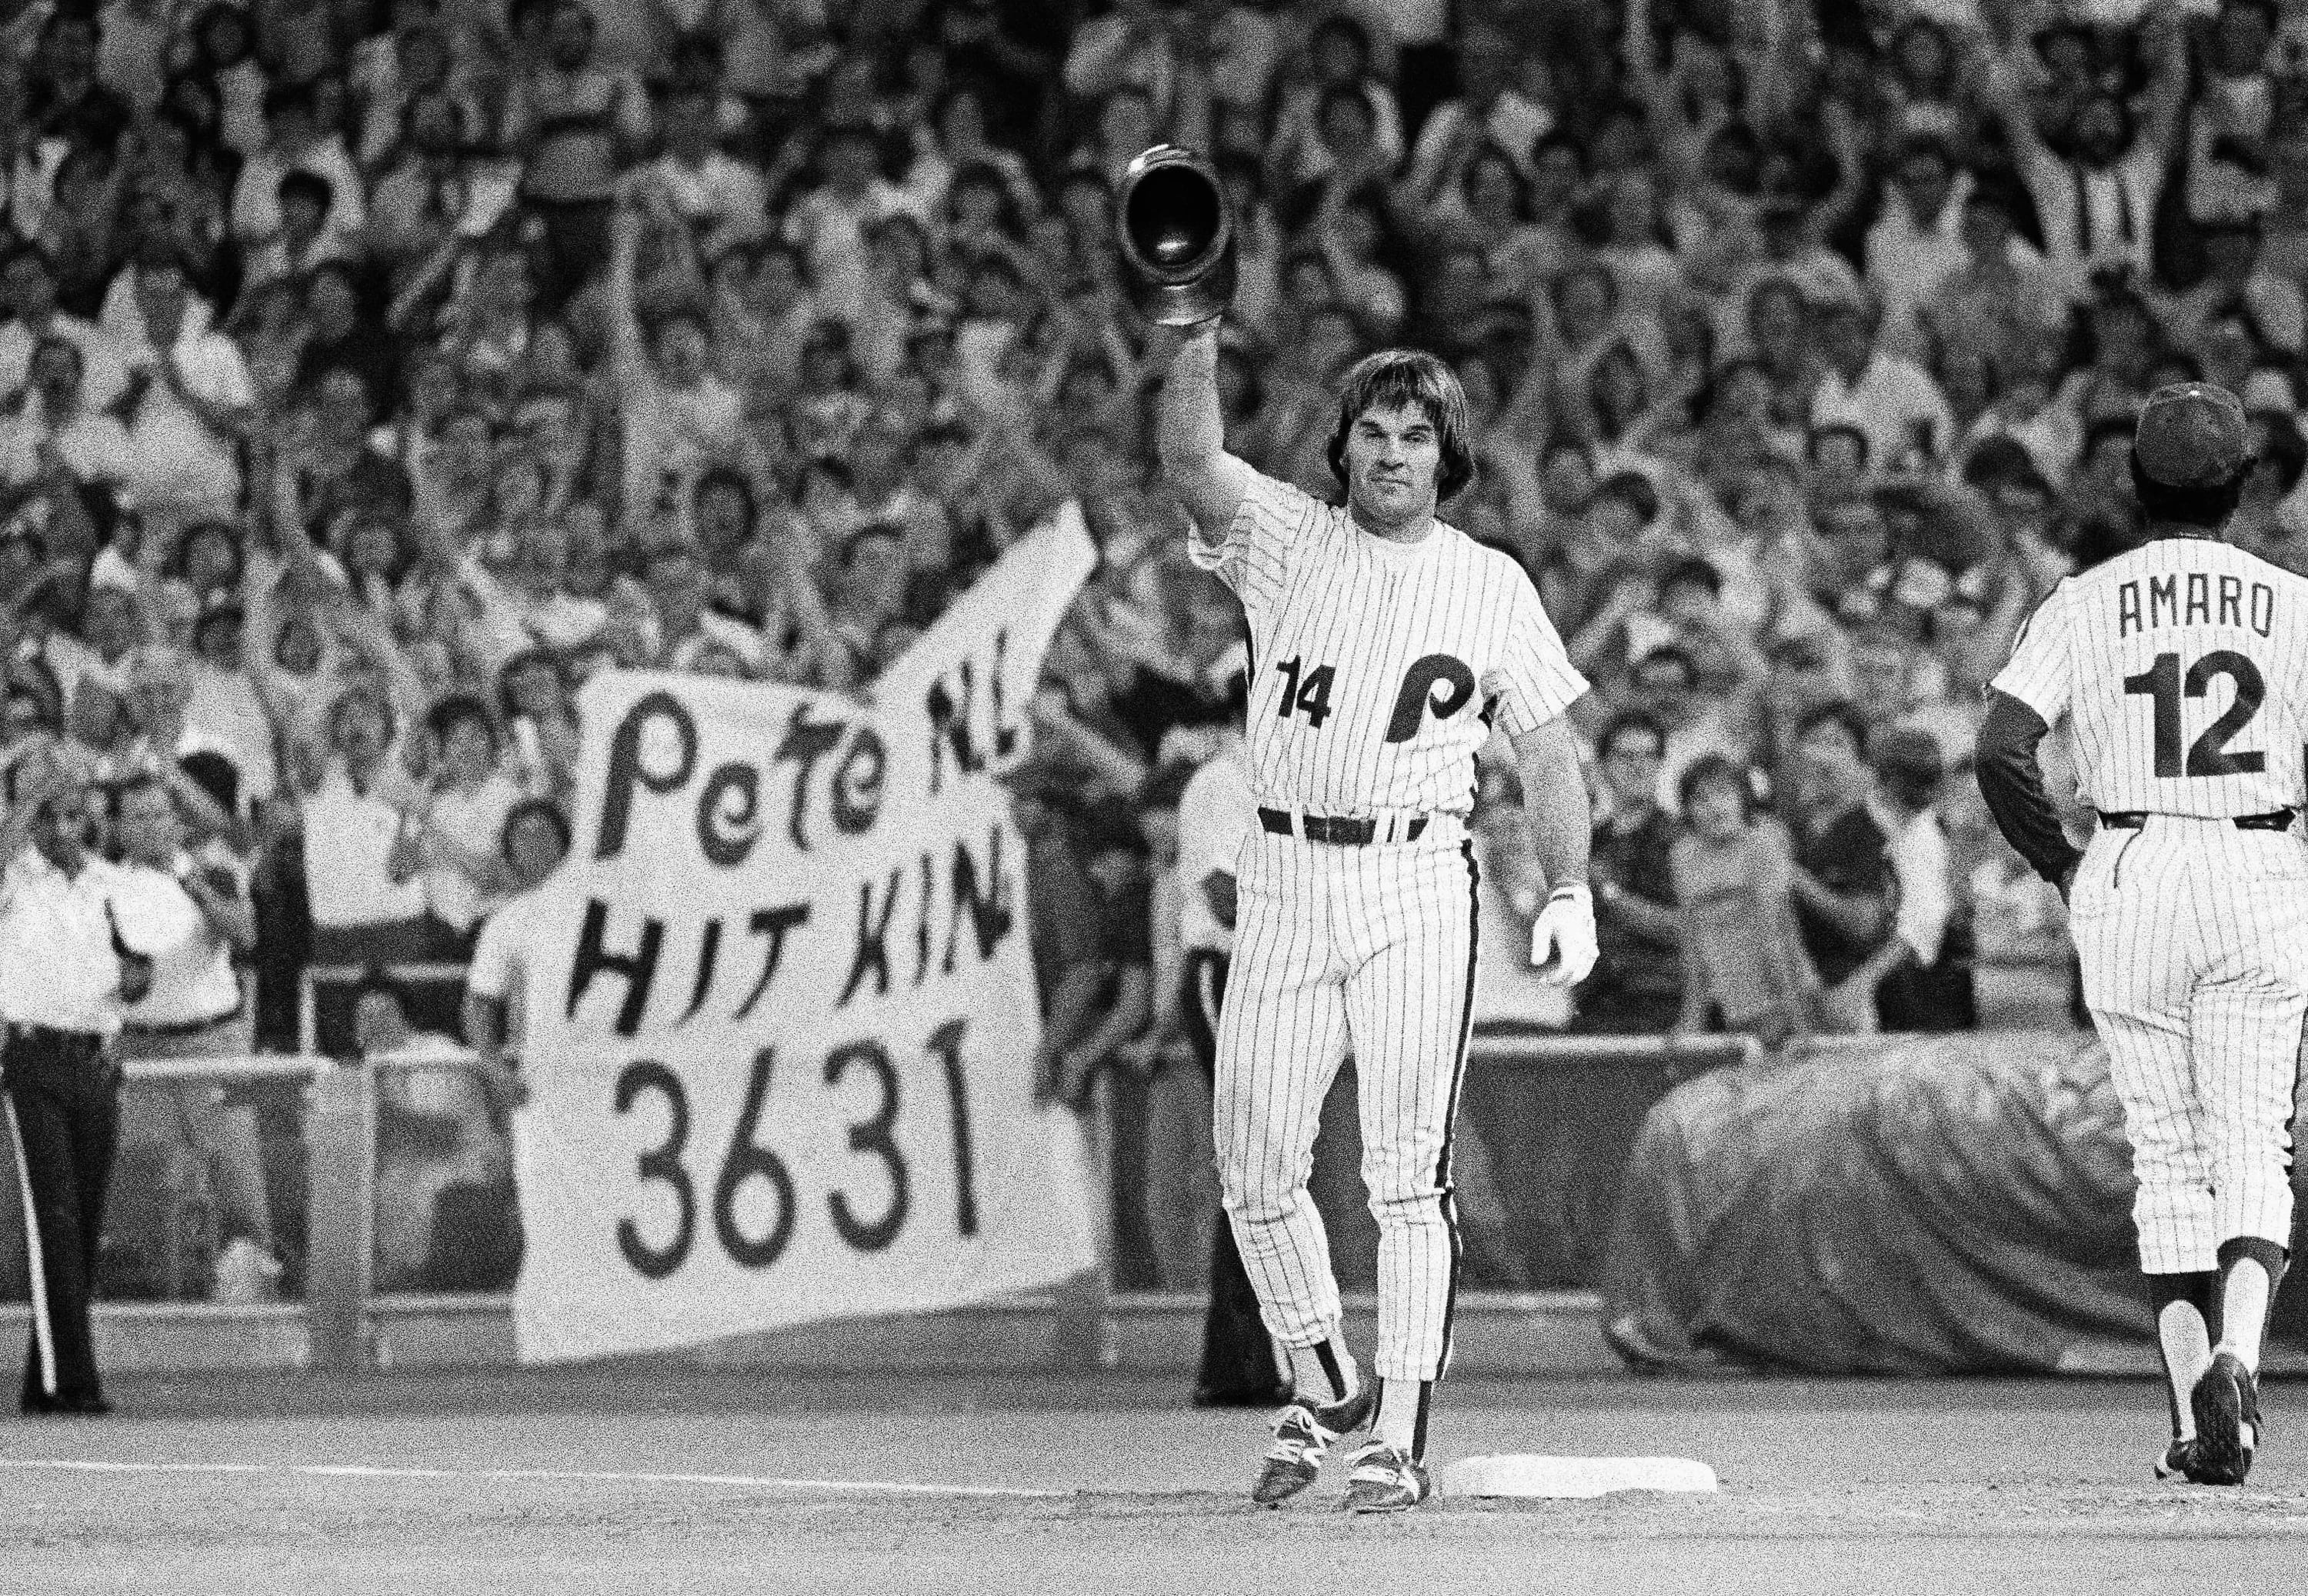 July 18, 1964: Pete Rose drives in six runs as Reds hammer first